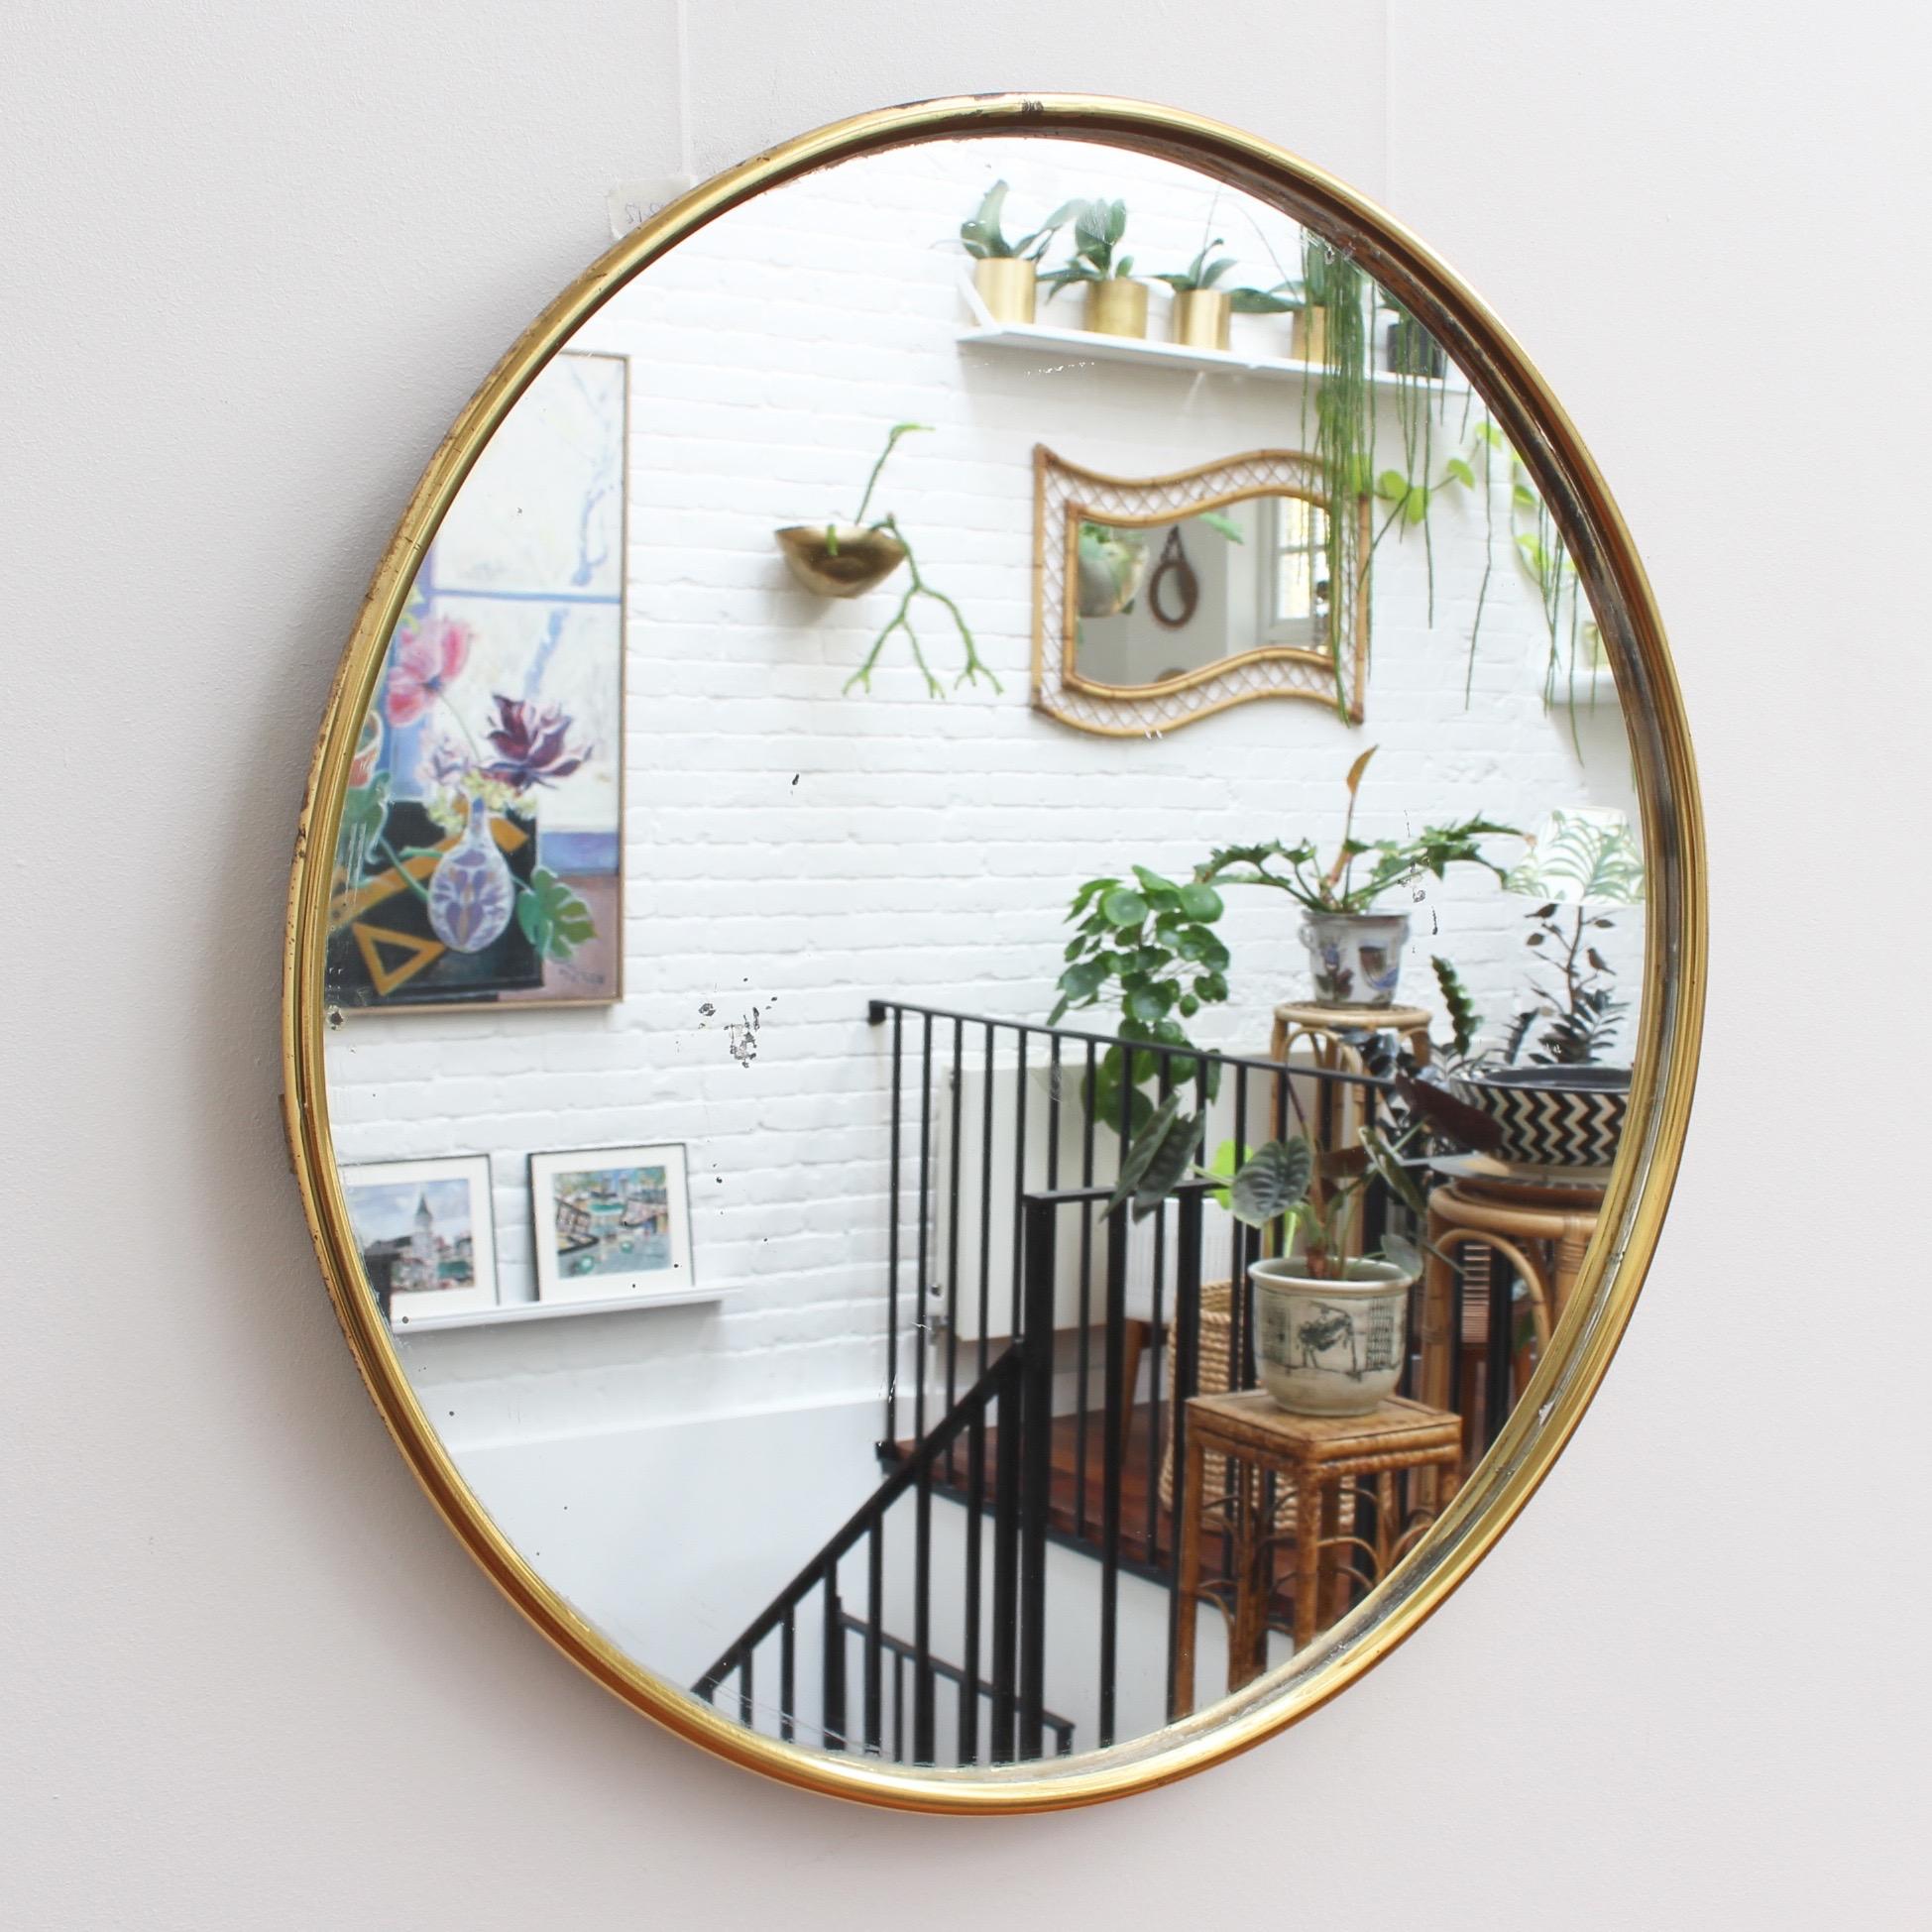 Midcentury Italian wall mirror with brass frame (circa 1950s). The mirror is perfectly round and porthole-shaped with a unique tubular brass frame. It is distinctive in a modern Gio Ponti style. The piece is in fair vintage condition with some